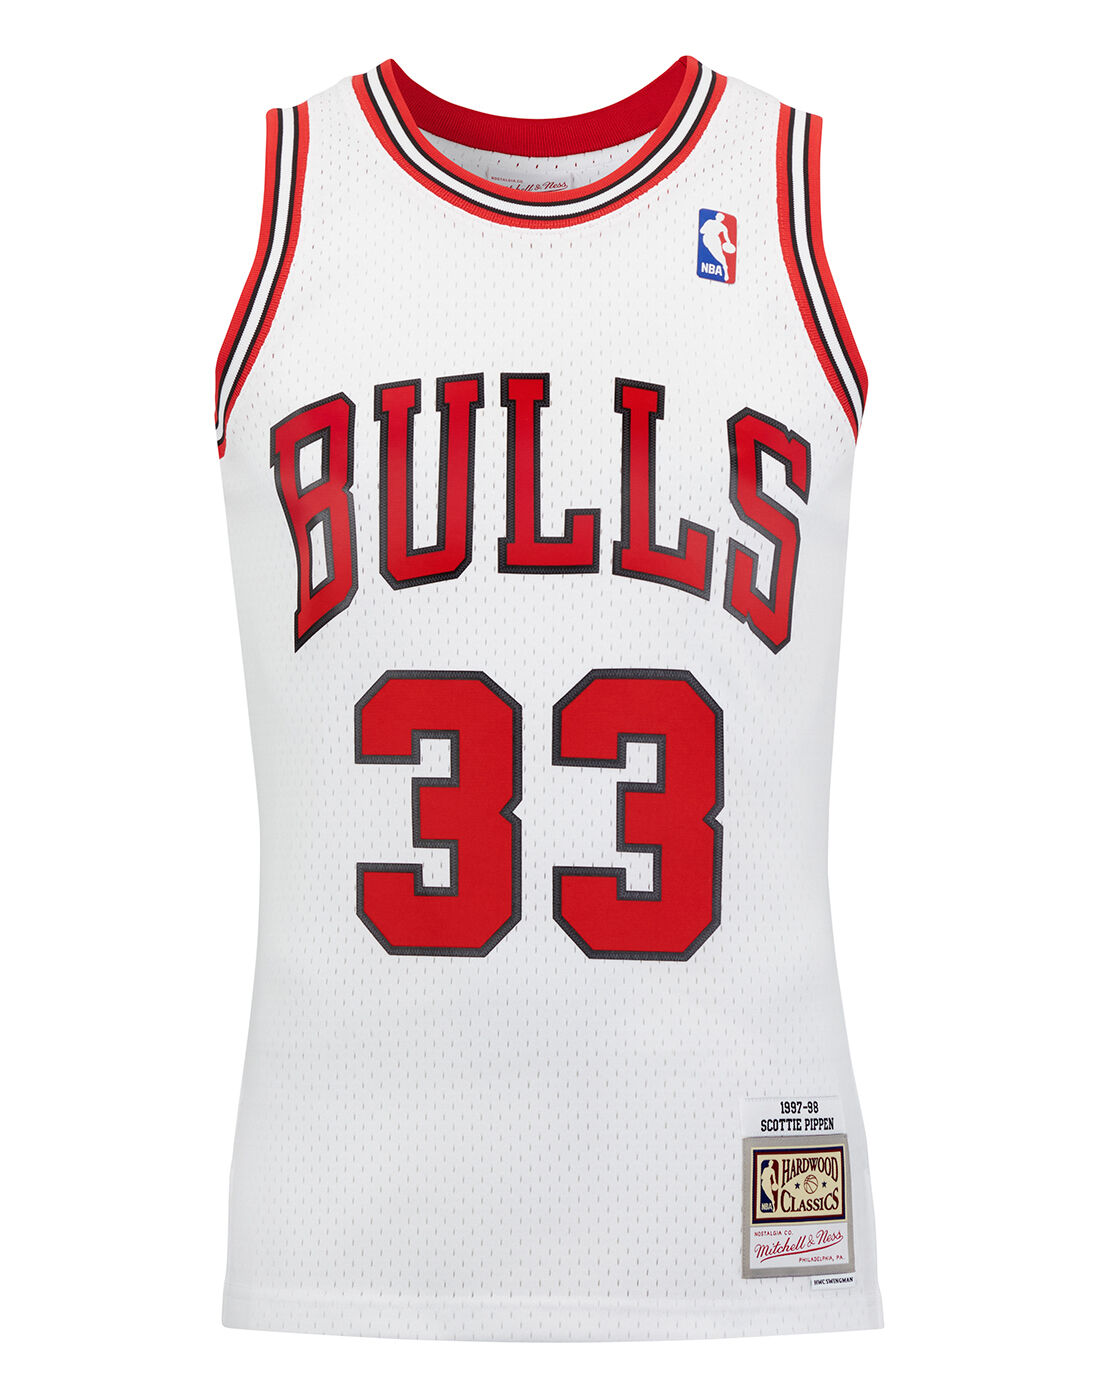 pippen jersey uk